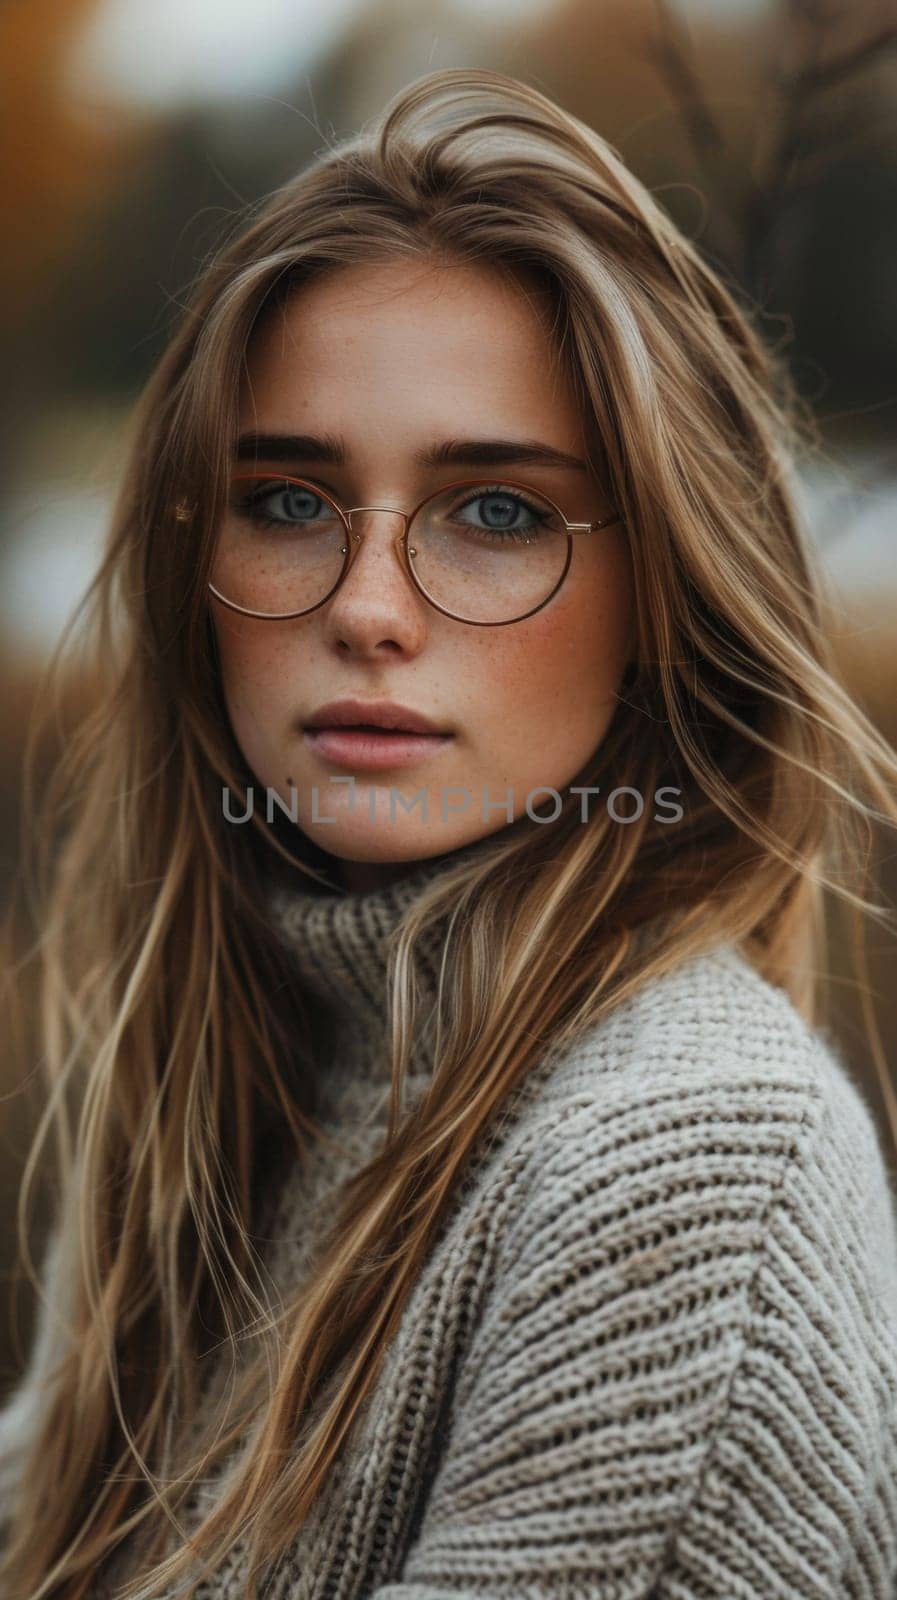 A woman with glasses and a sweater posing for the camera, AI by starush